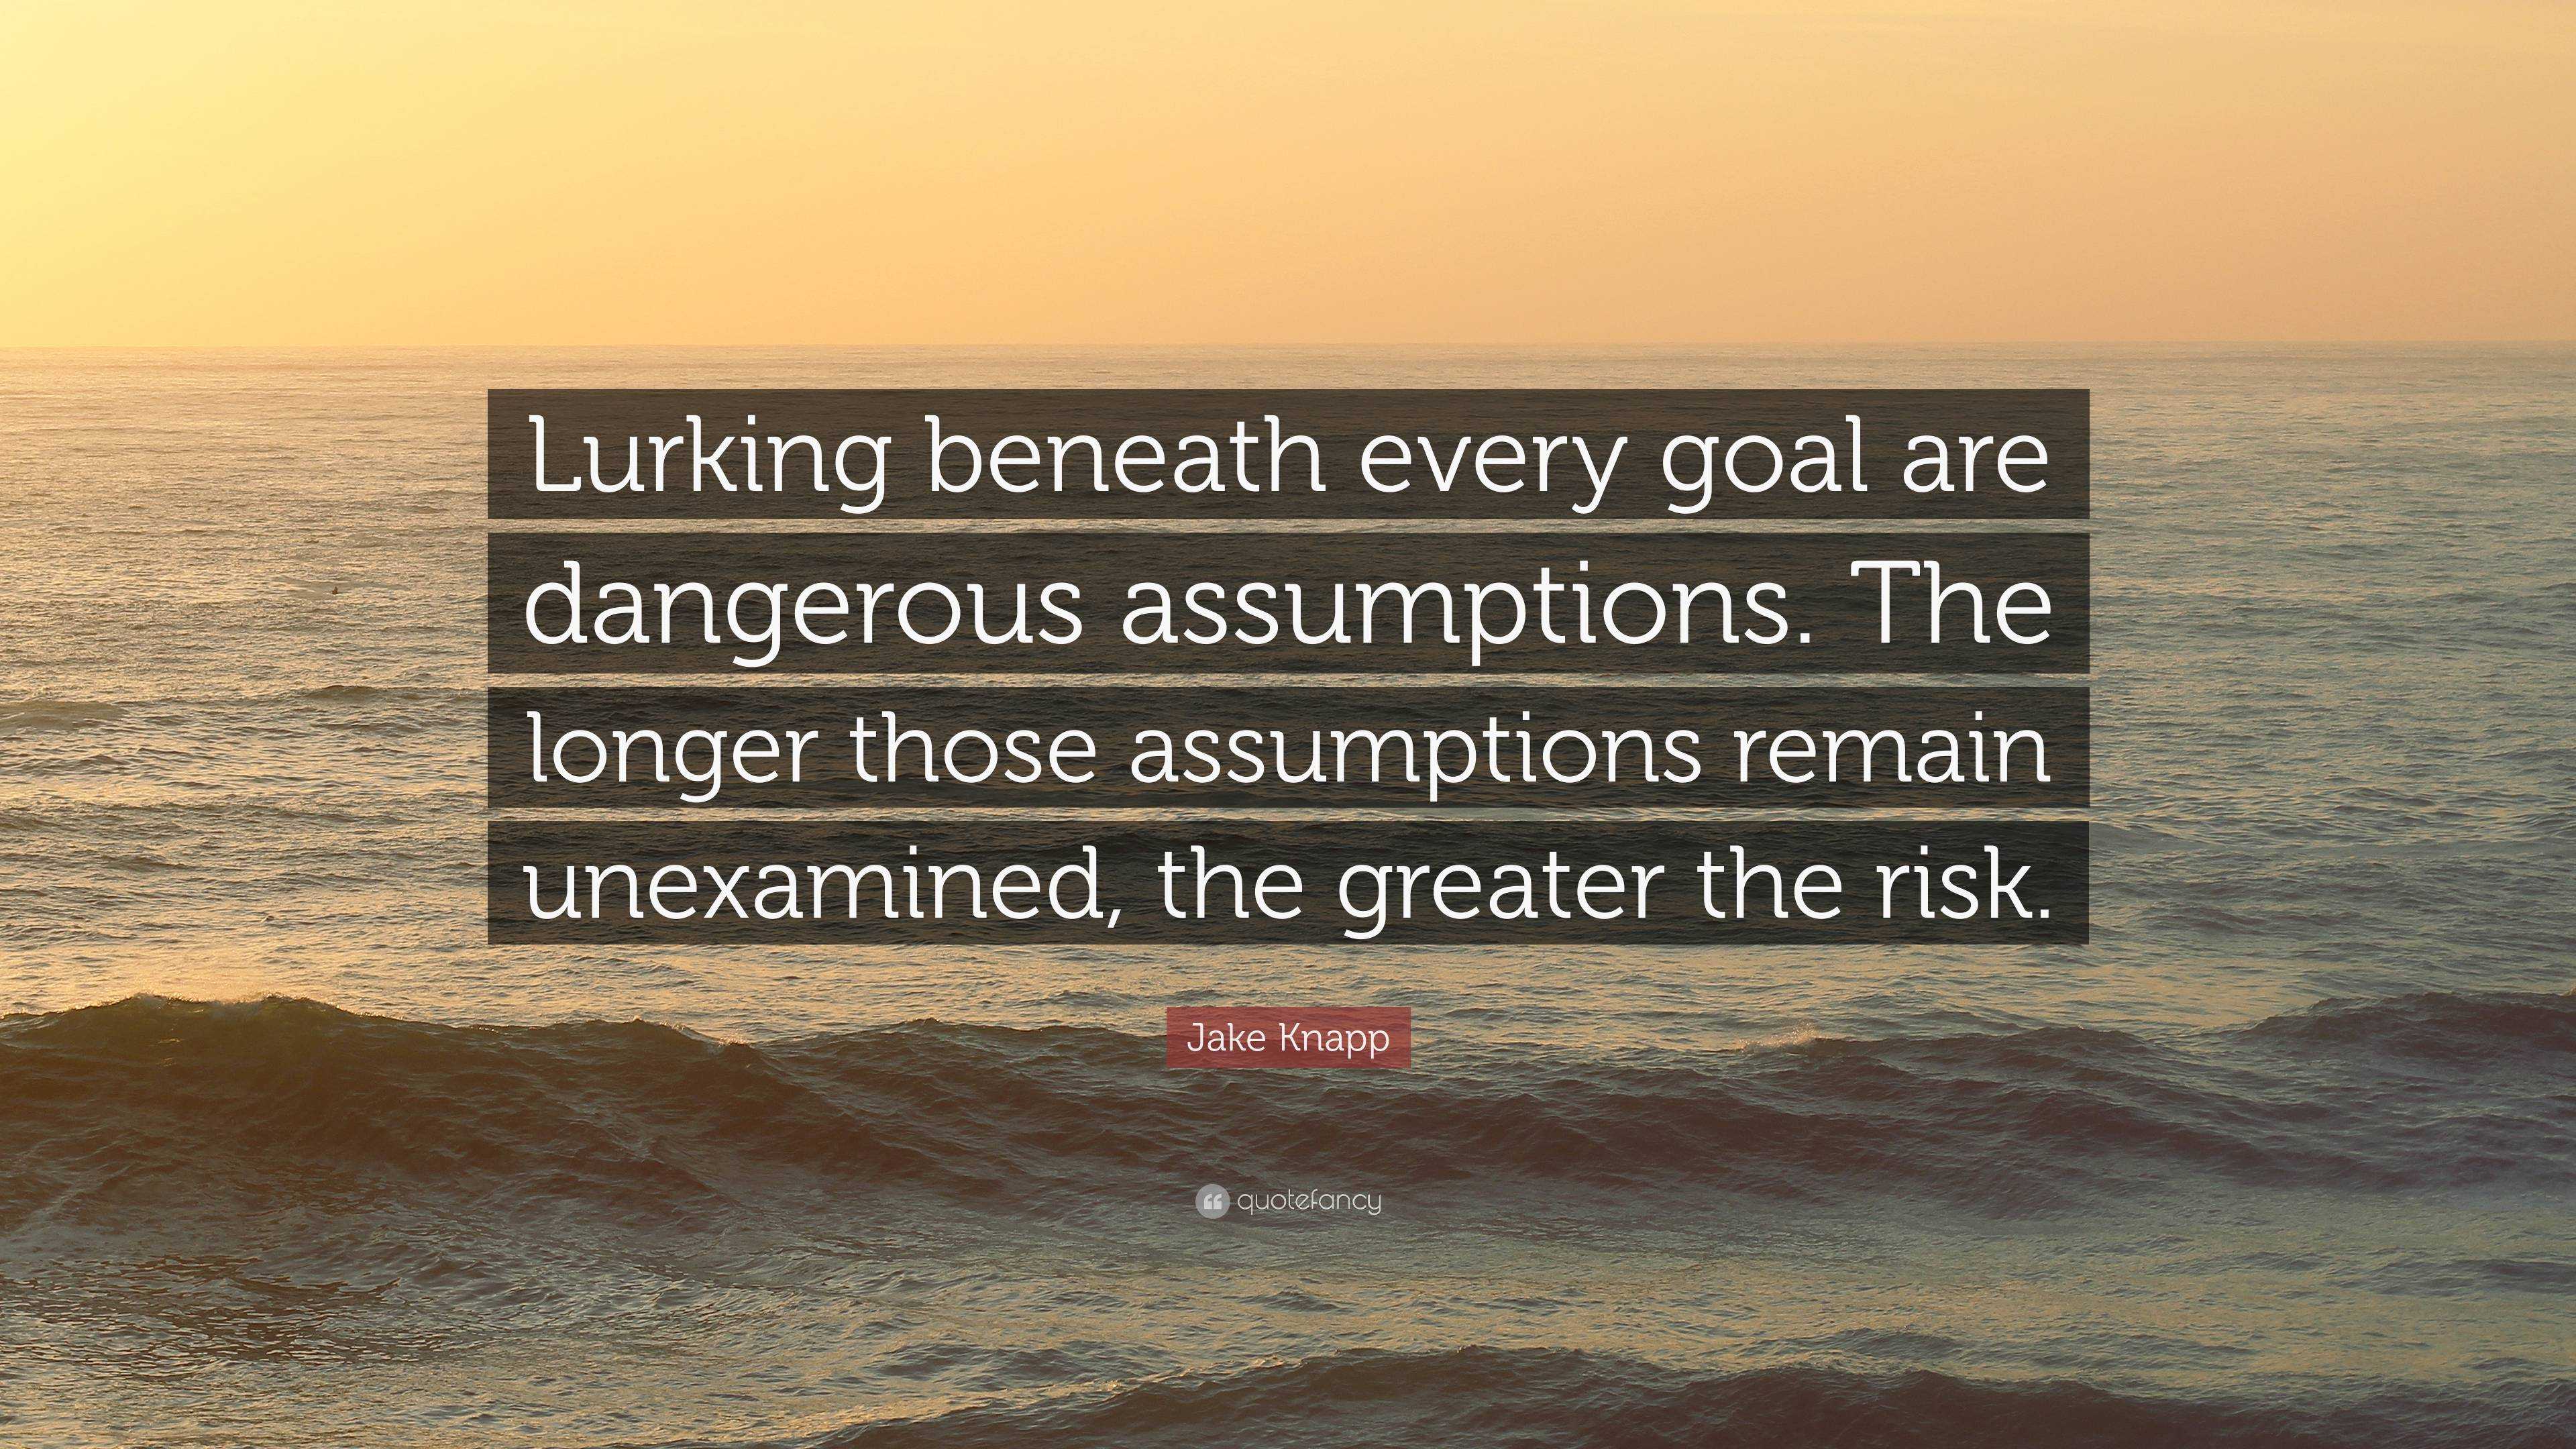 Jake Knapp Quote: “Lurking beneath every goal are dangerous assumptions ...